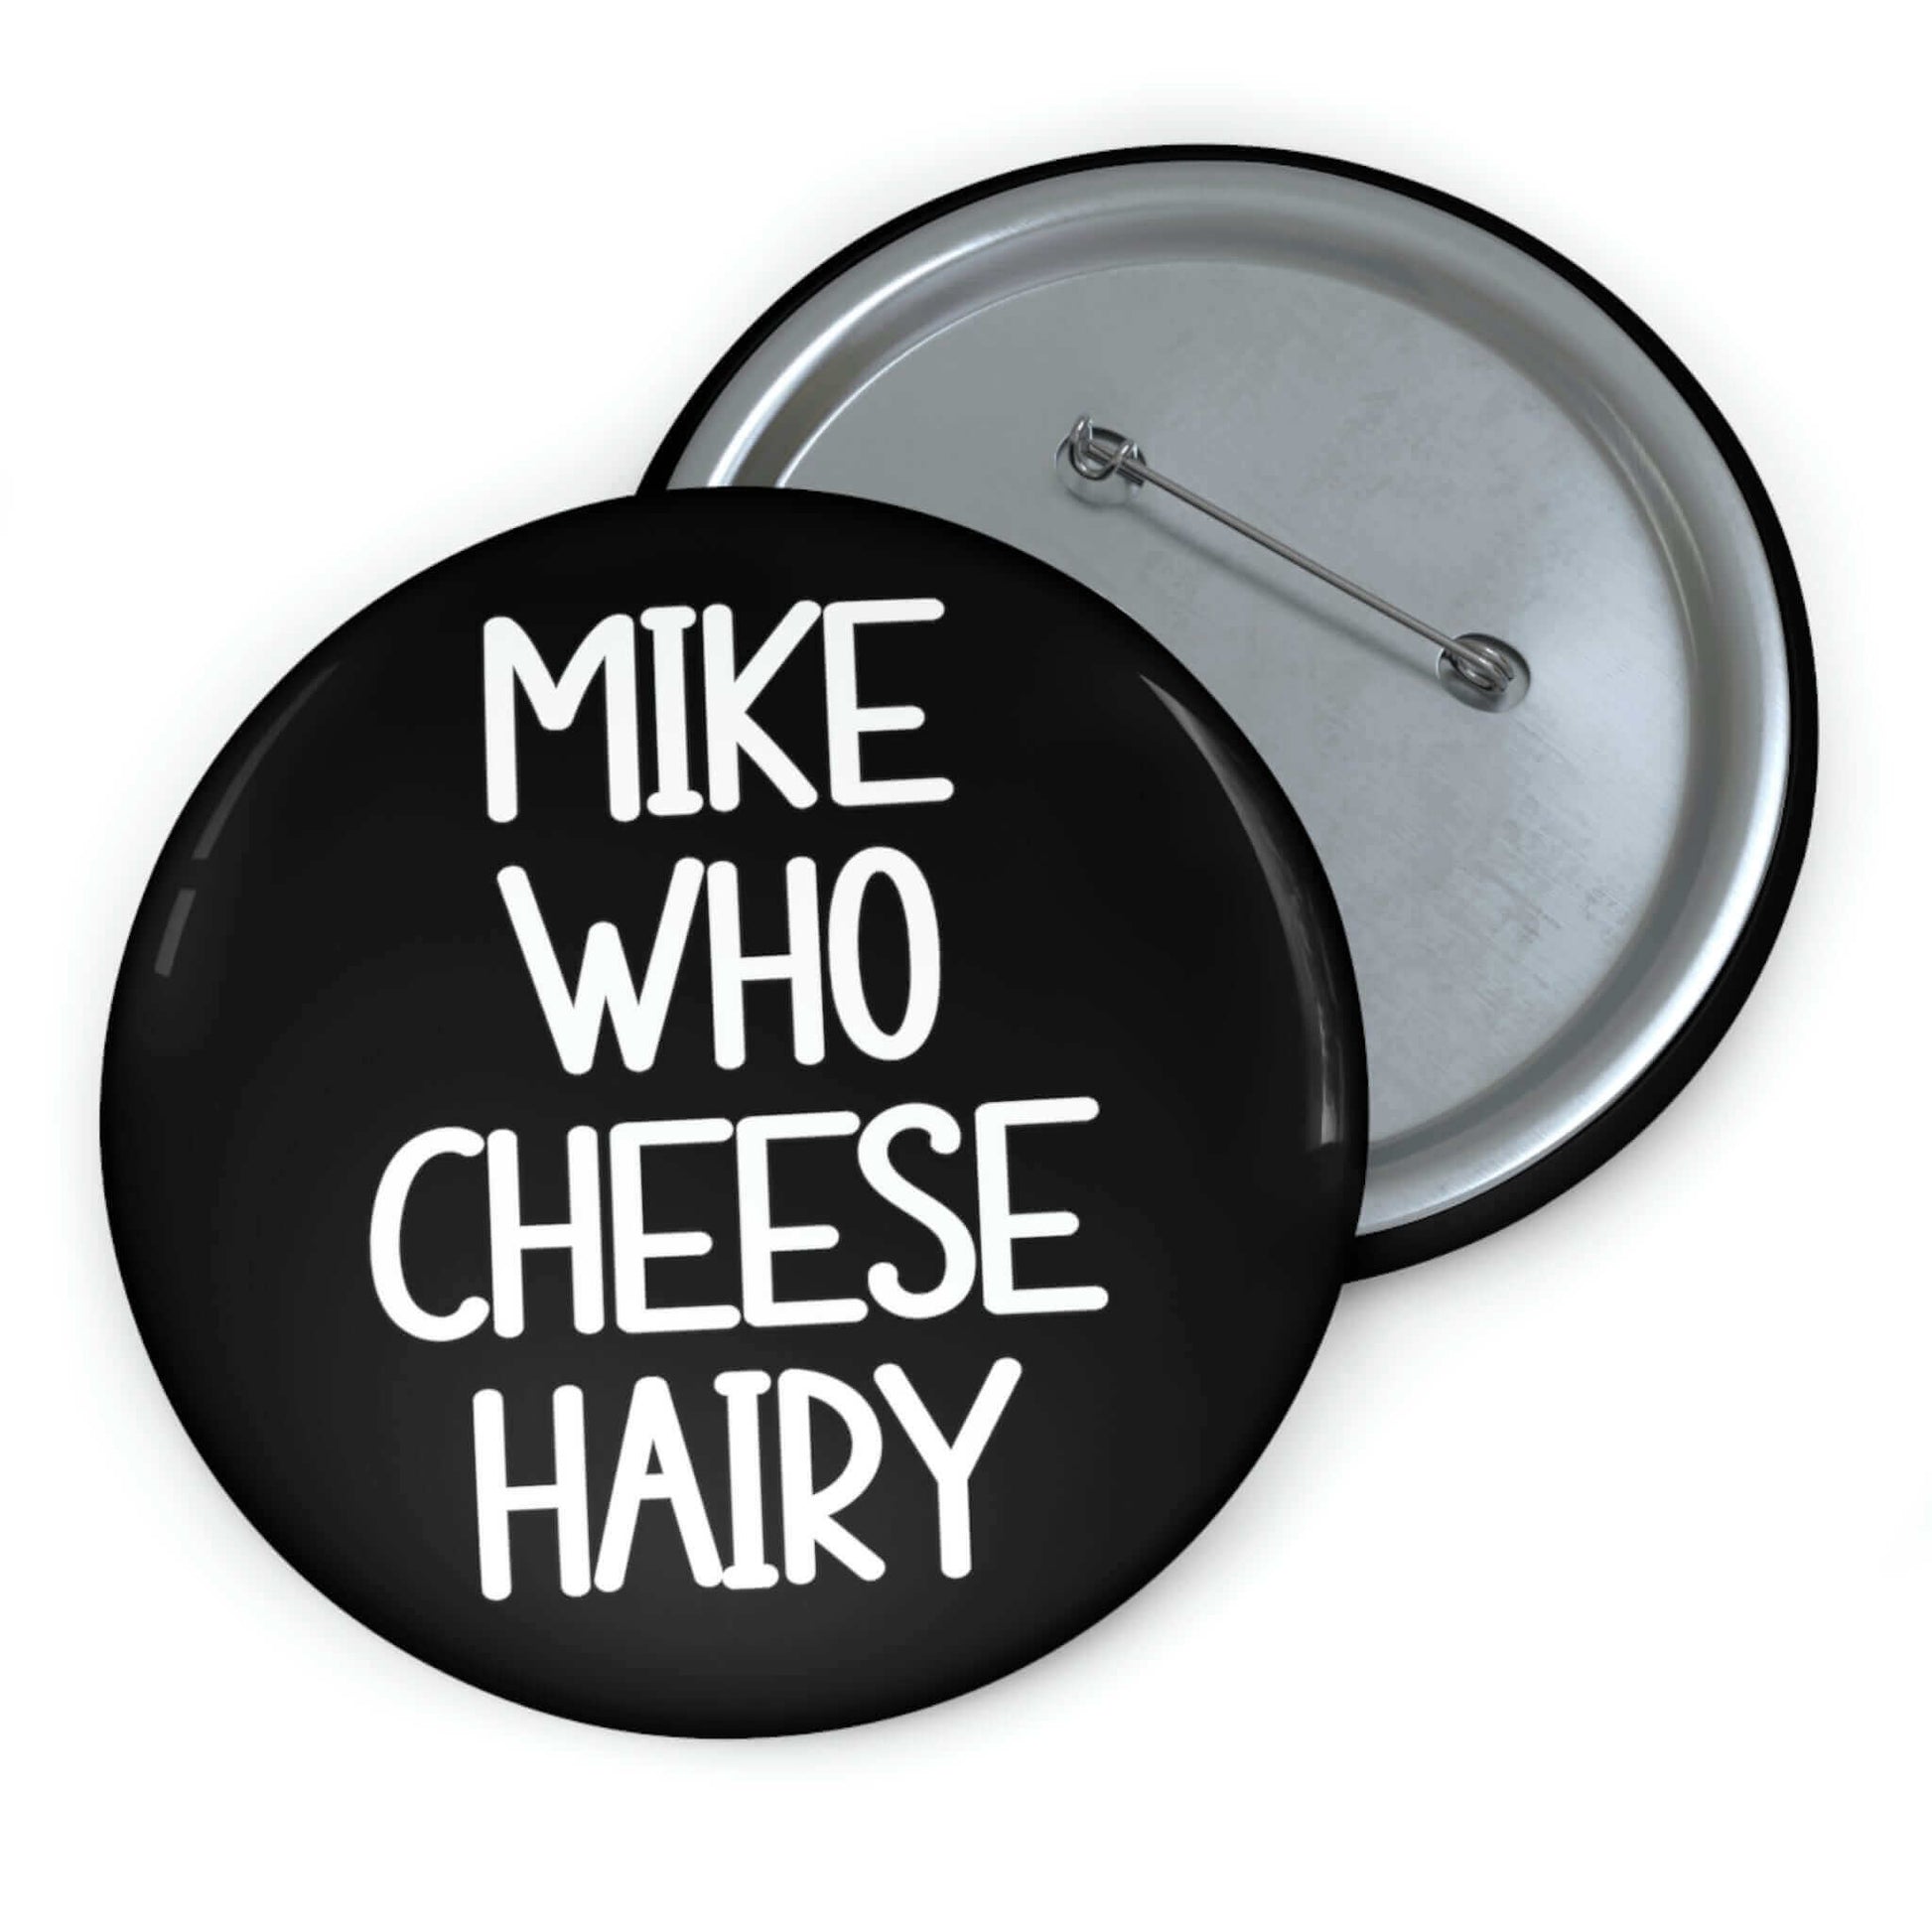 Funny pun button that says Mike who cheese hairy.